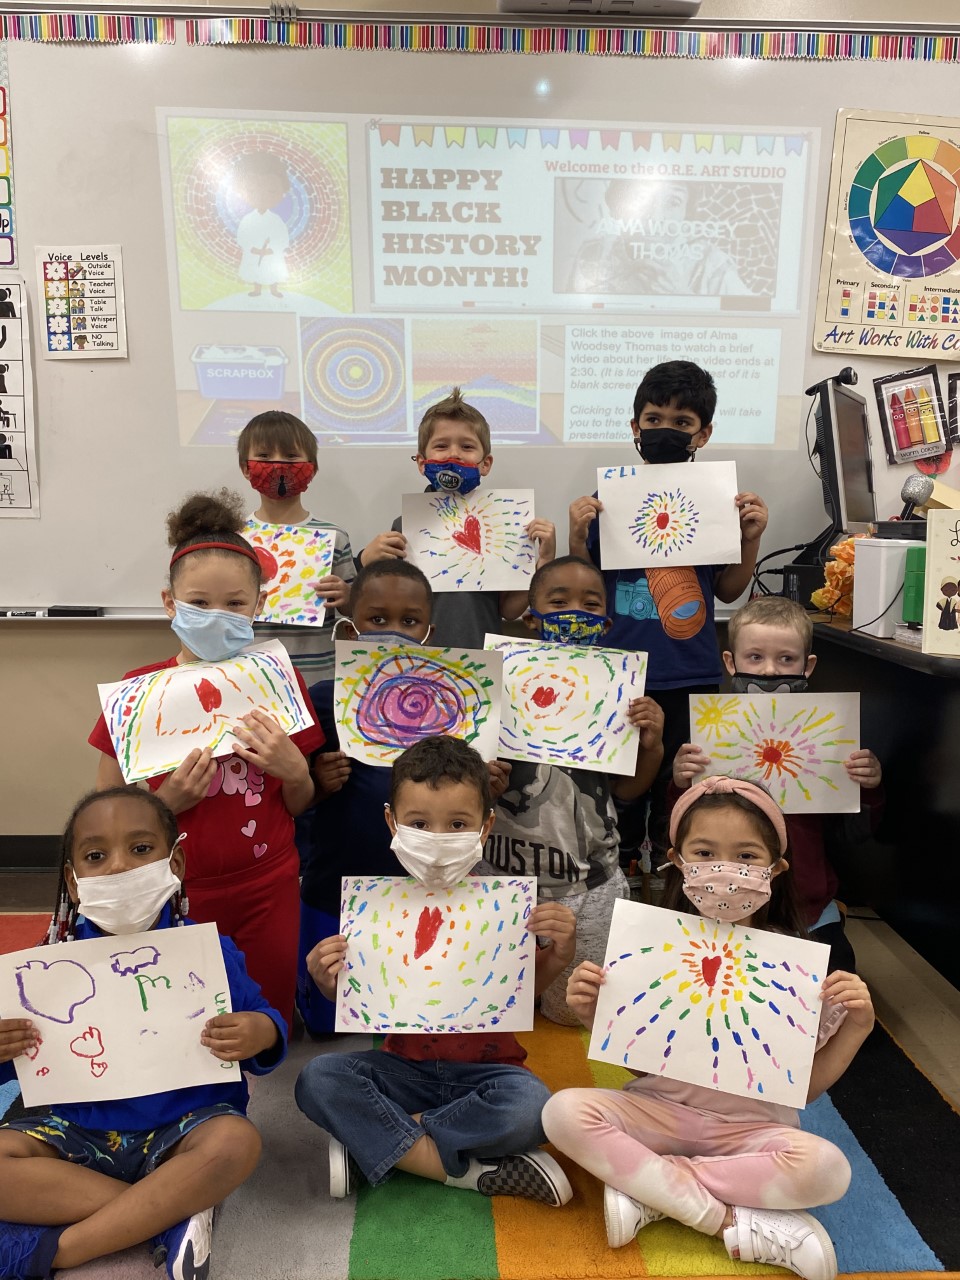 Students smile while holding their art work.